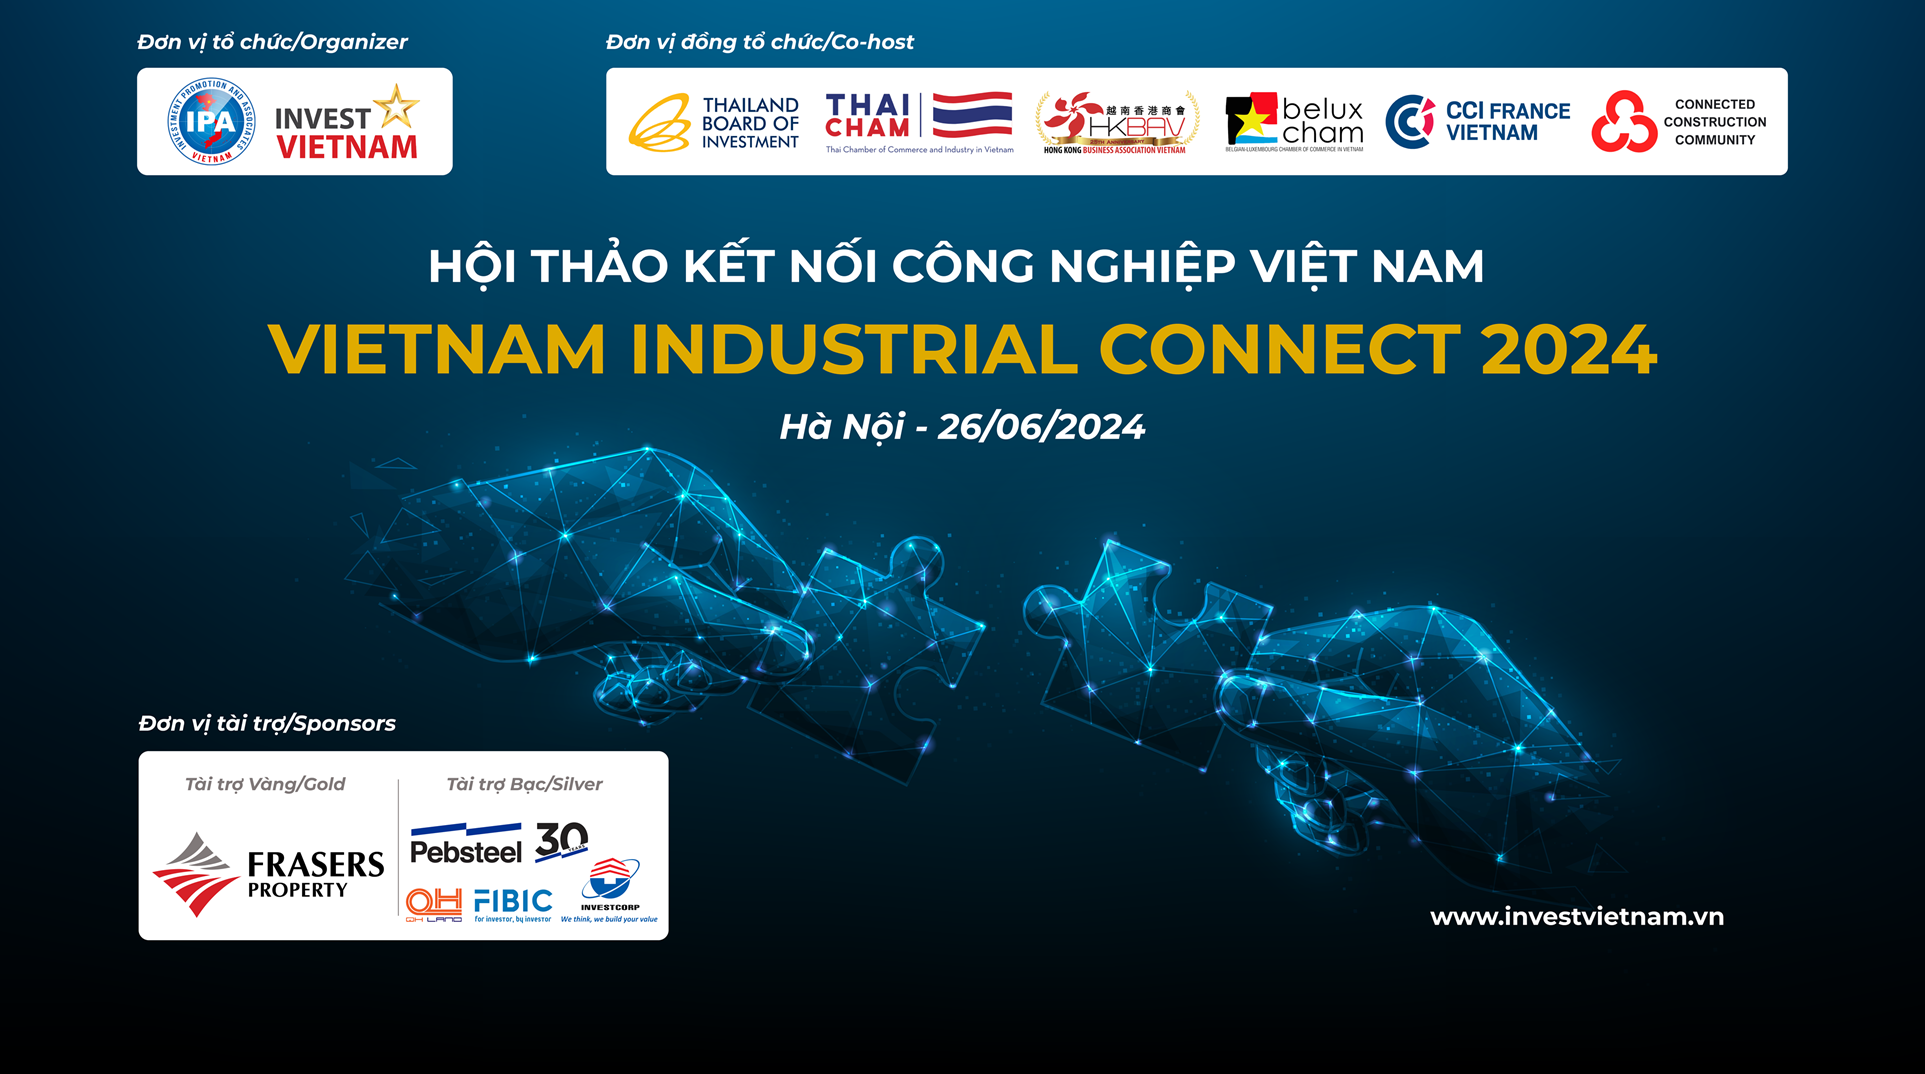 Conference on Vietnam Industrial Connect 2024